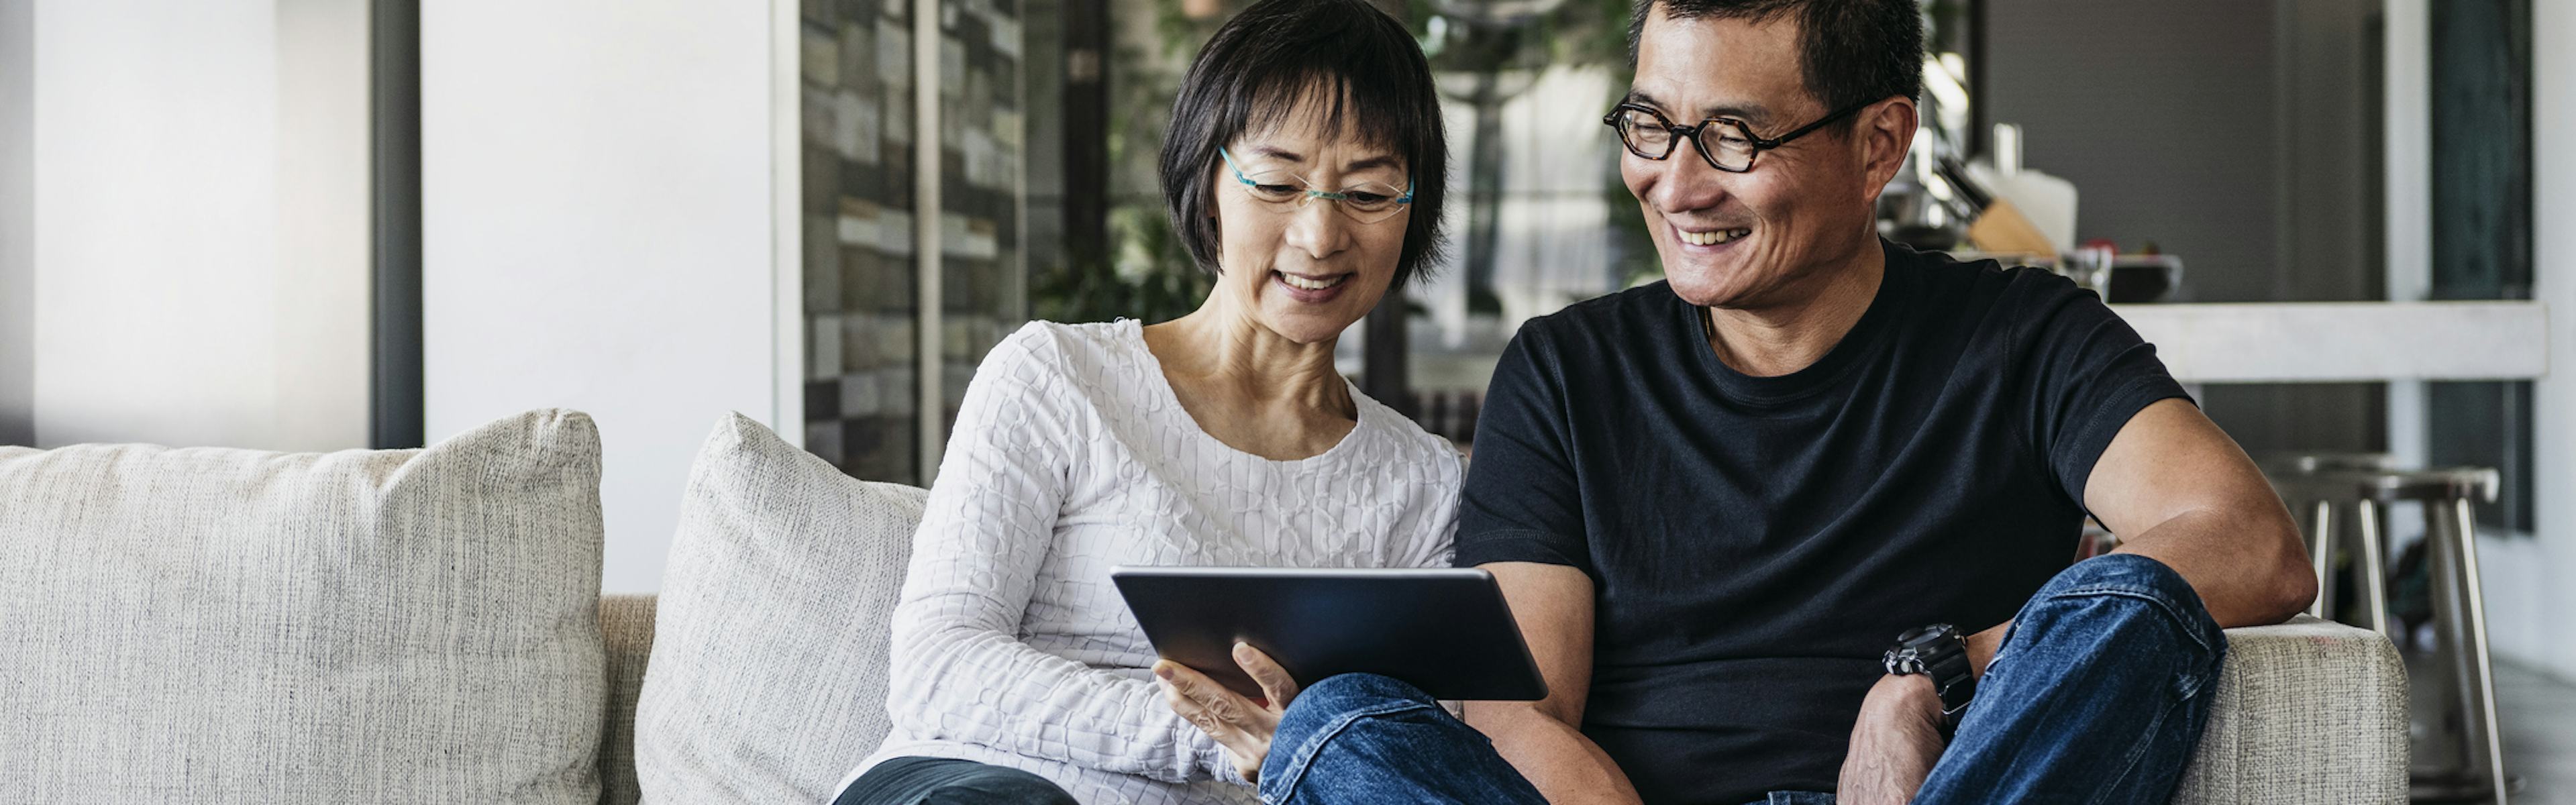 Middle aged couple sitting on couch, smiling looking at a tablet